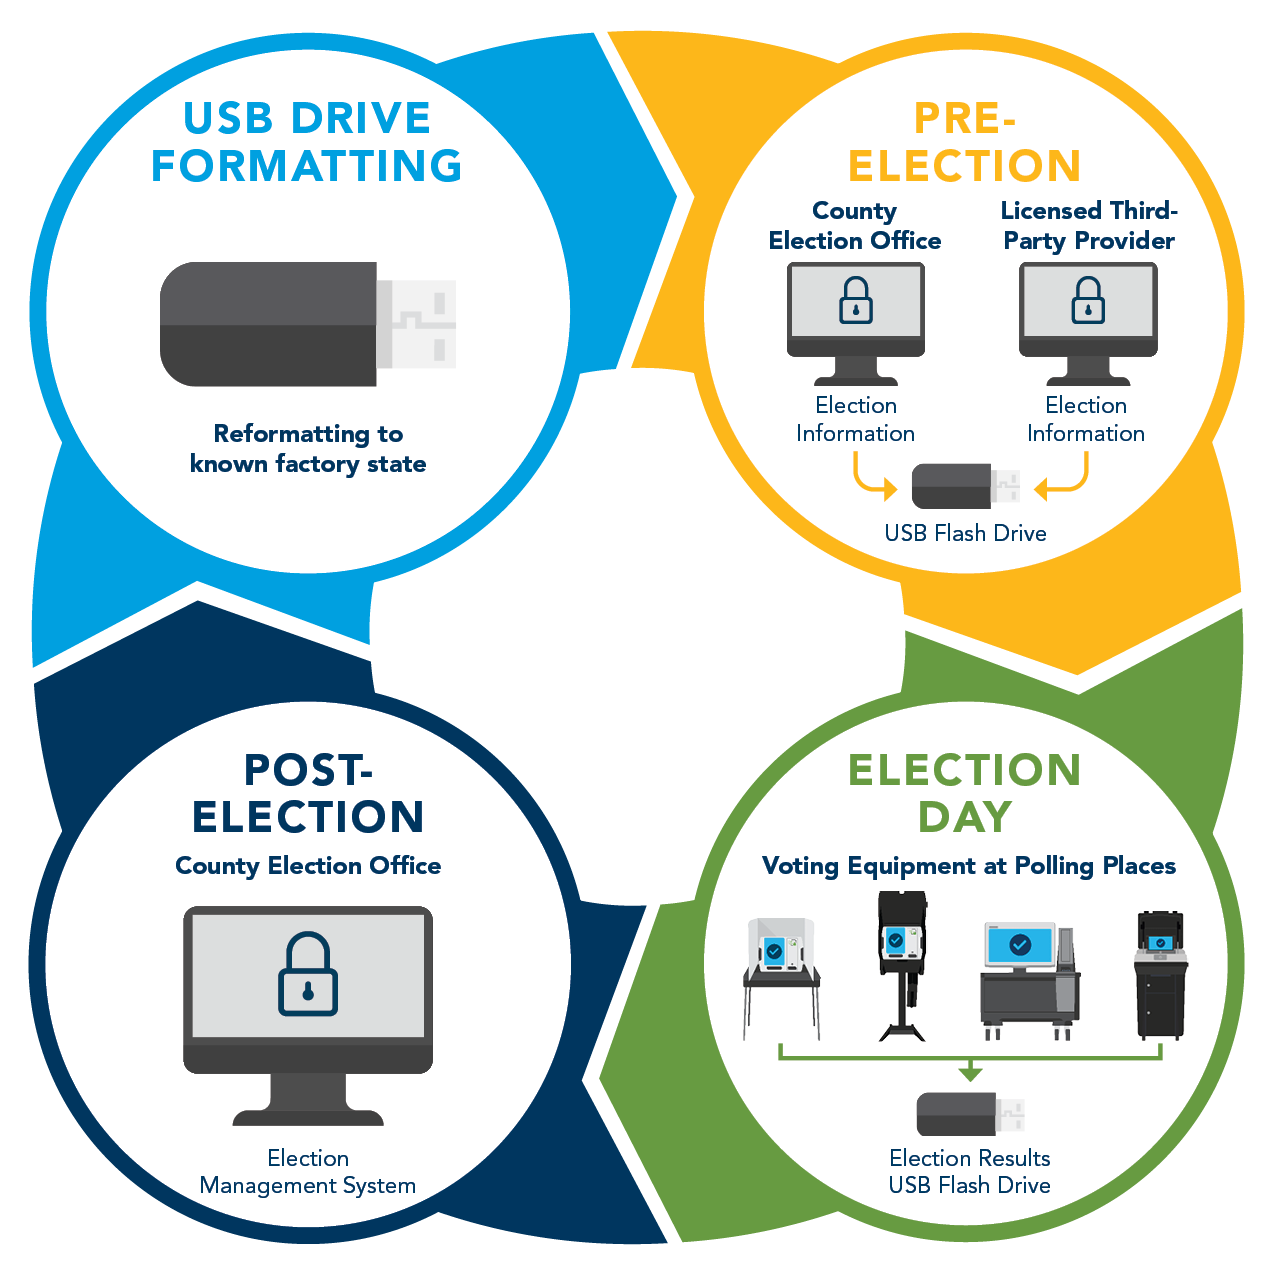 Infographic showing the cycle of a USB drive, from Formatting to Election Prep, to Election Day, to Election Night, and back to formatting